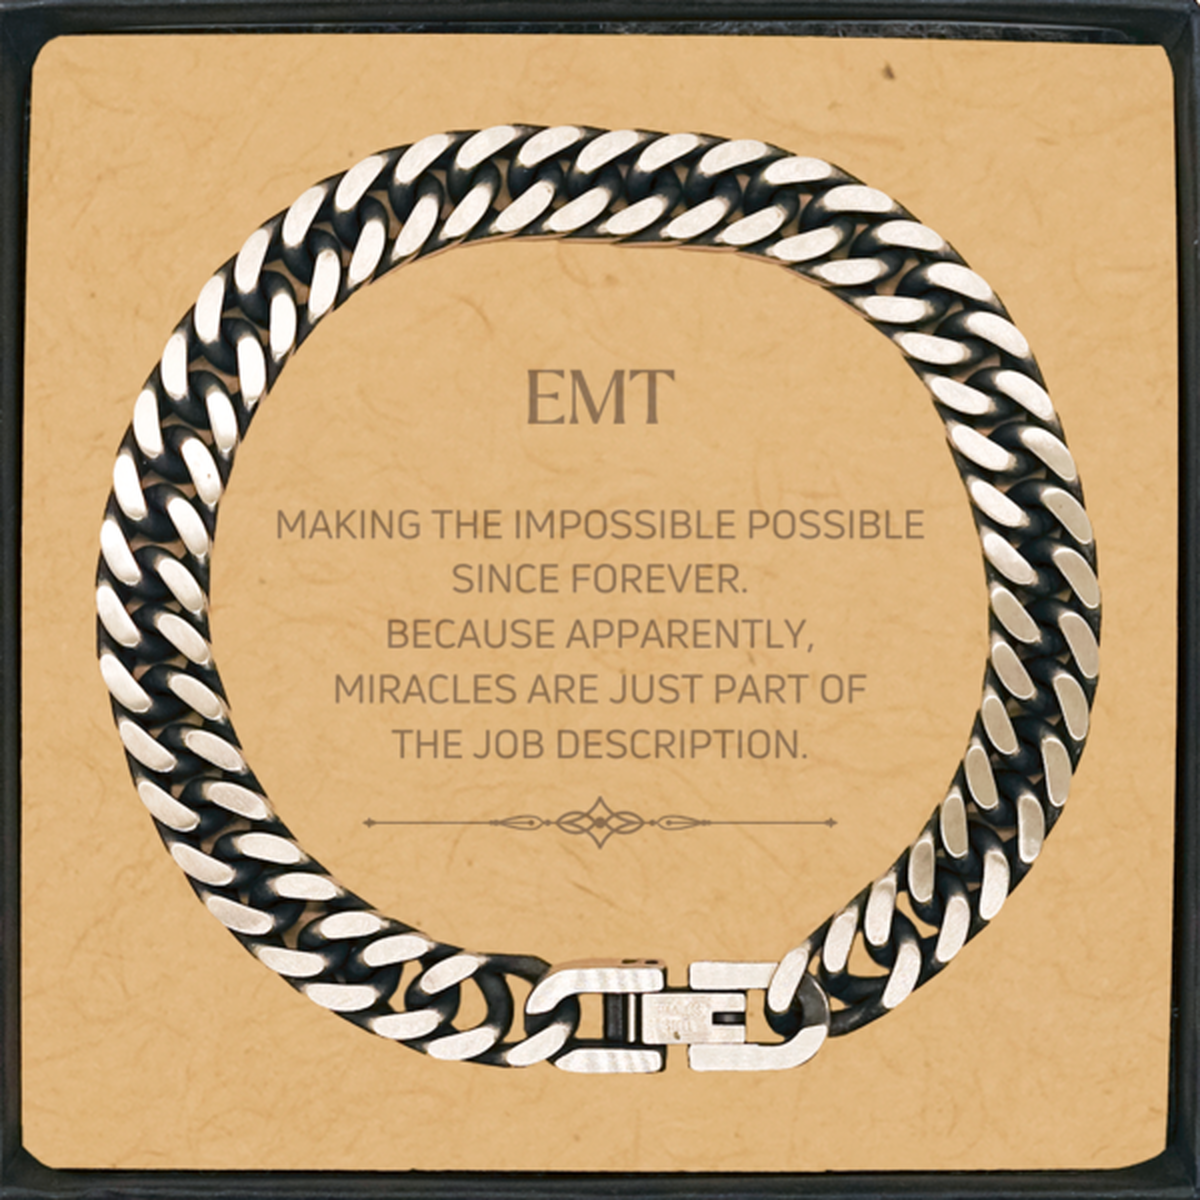 Funny EMT Gifts, Miracles are just part of the job description, Inspirational Birthday Cuban Link Chain Bracelet For EMT, Men, Women, Coworkers, Friends, Boss